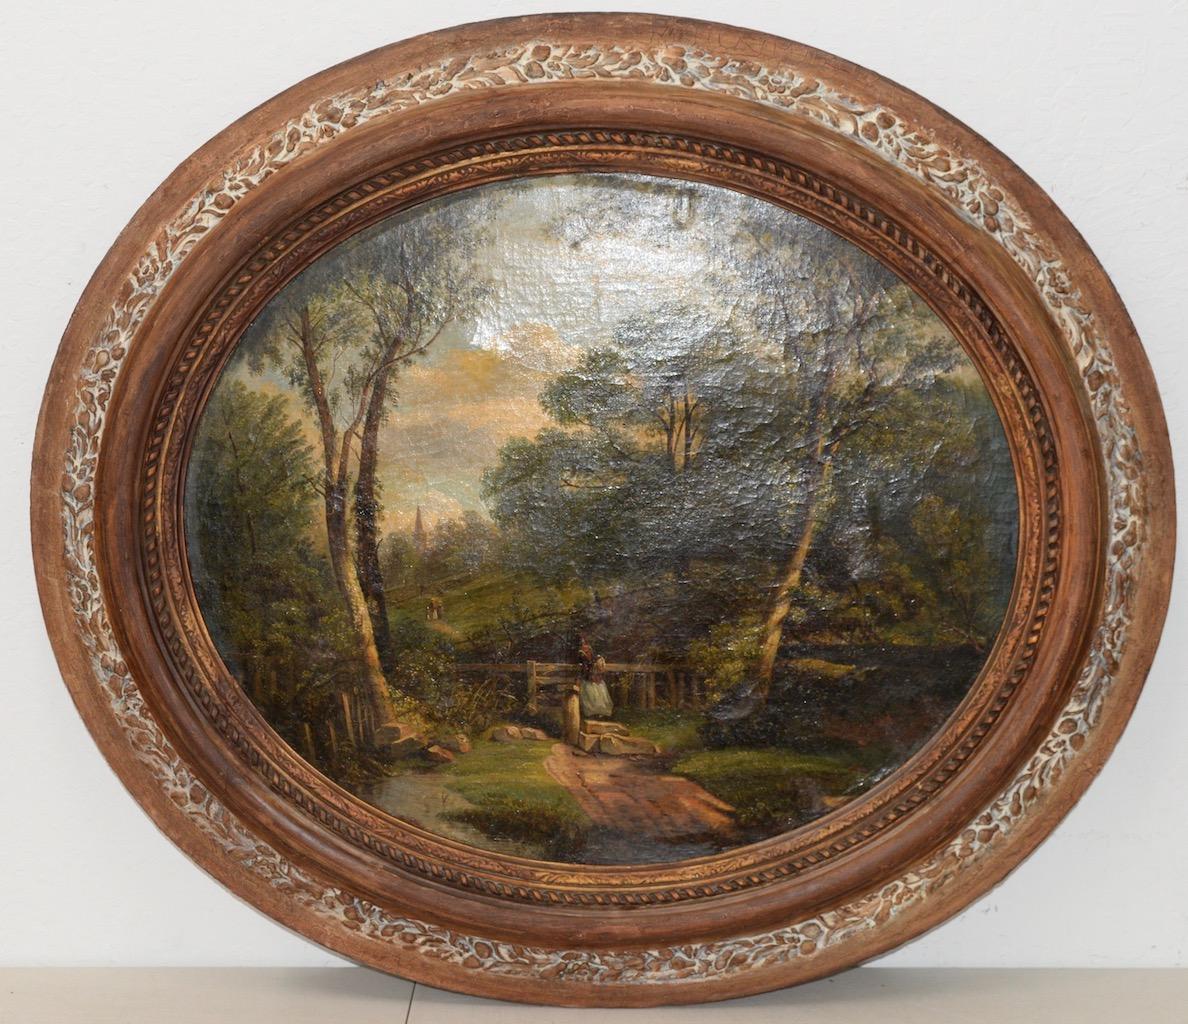 Unknown Landscape Painting - 18th to 19th Century Country Landscape w/ Figures & a Distant Steeple